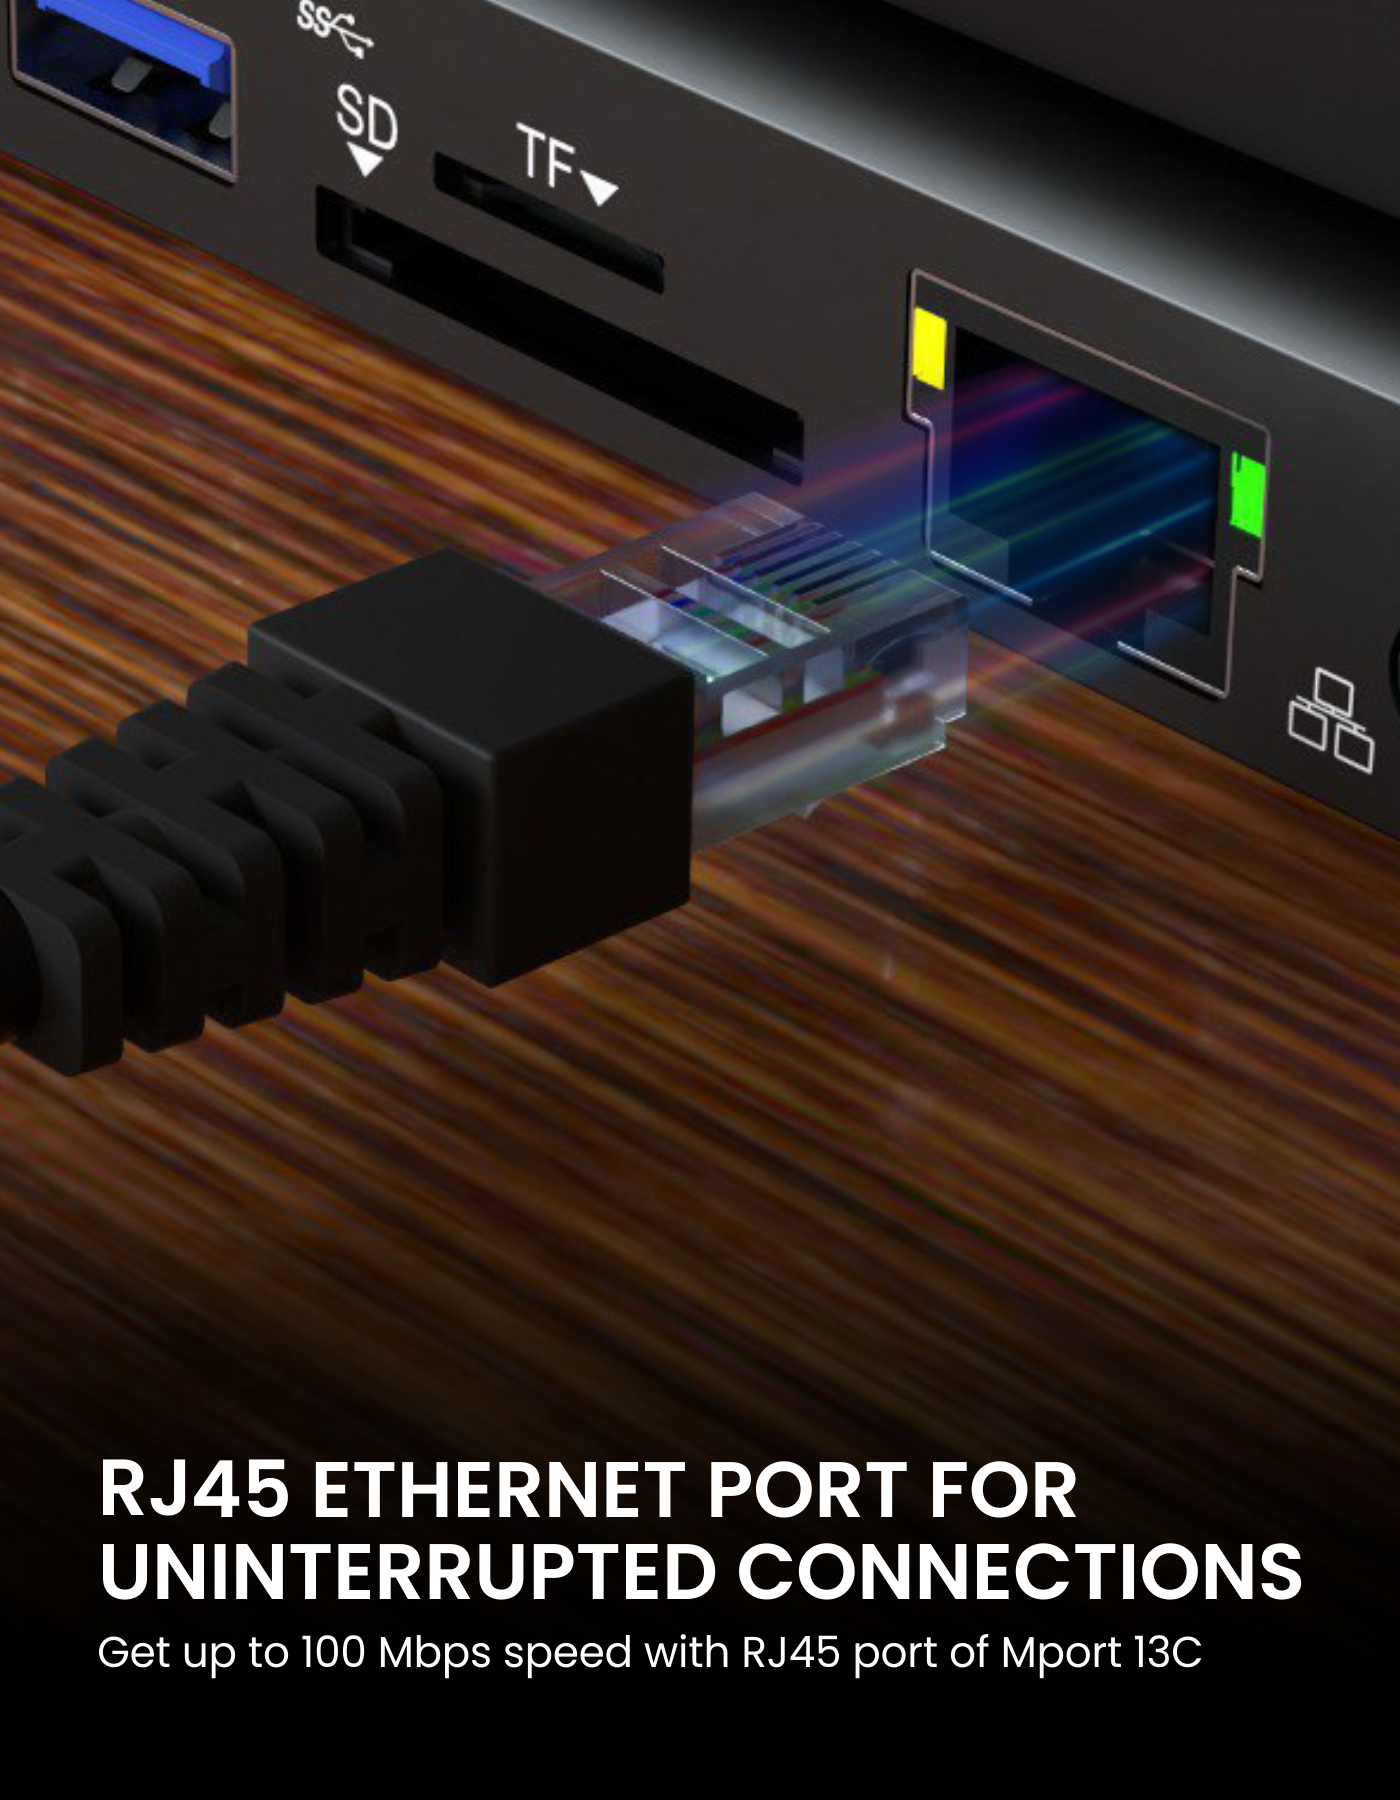 Portronics Mport 13C With Multiple USB connector 1 USB 3.0, 3 USB 2.0, VGA port, Type-C PD charging port, RJ45 Ethernet port, HDMI 4K port, SD card slot, TF card slot, and 3.5mm jack, make working and multitasking easy for yourself.